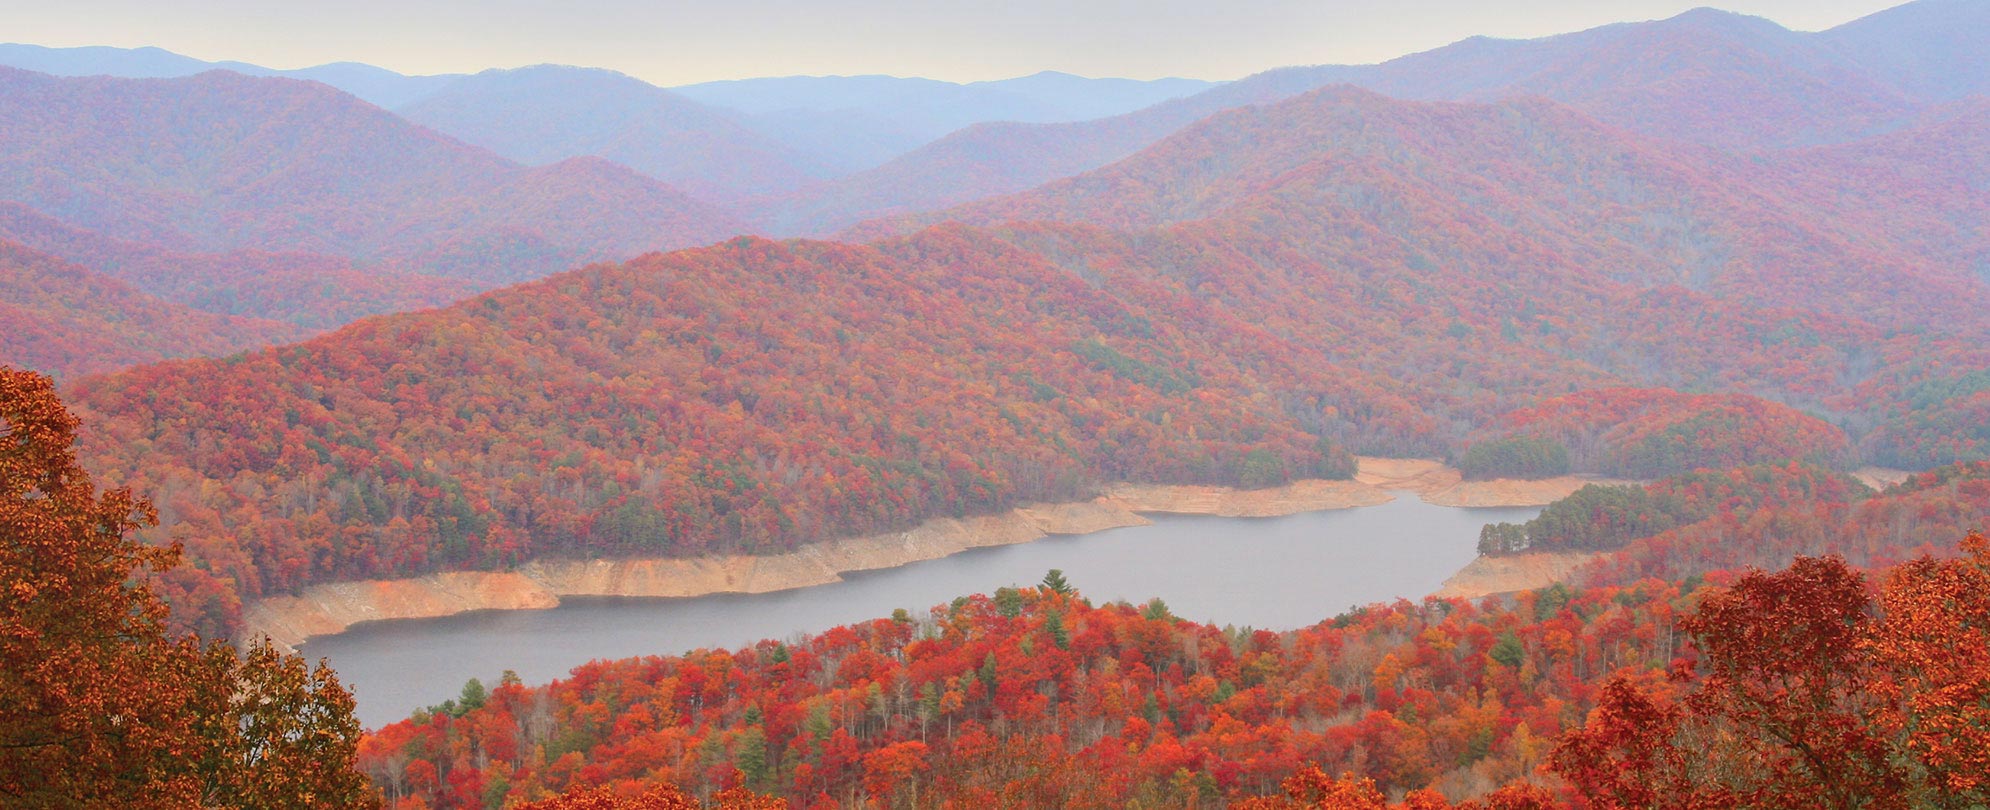 Red and orange trees cover the mountains during the fall at Smoky Mountains National Park in Tennessee 